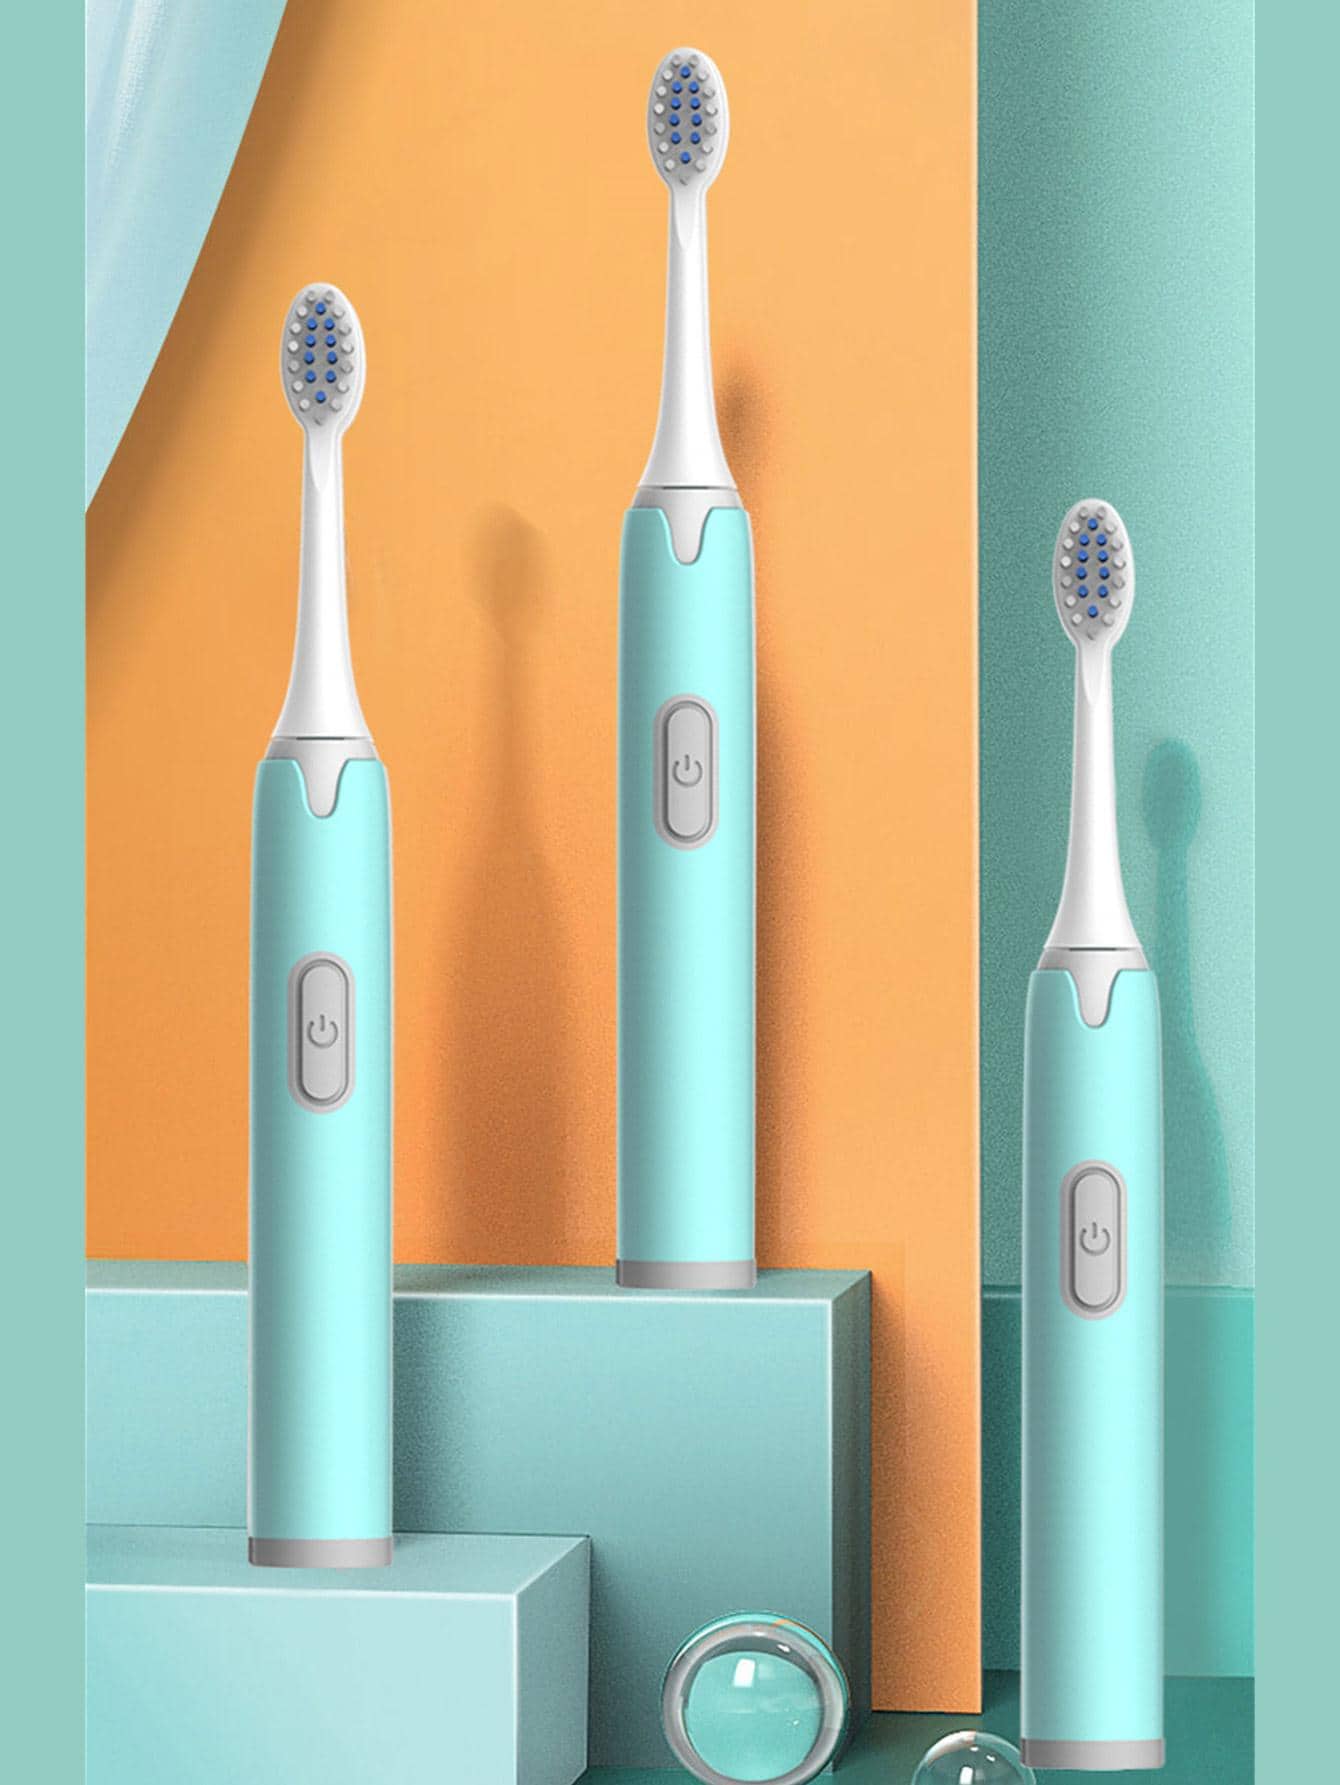 2pcs/set PP Electric Toothbrush & 6pcs Replacement Toothbrush Head, Modern Two Tone Waterproof Portable Electric Toothbrush For Birthday Gift